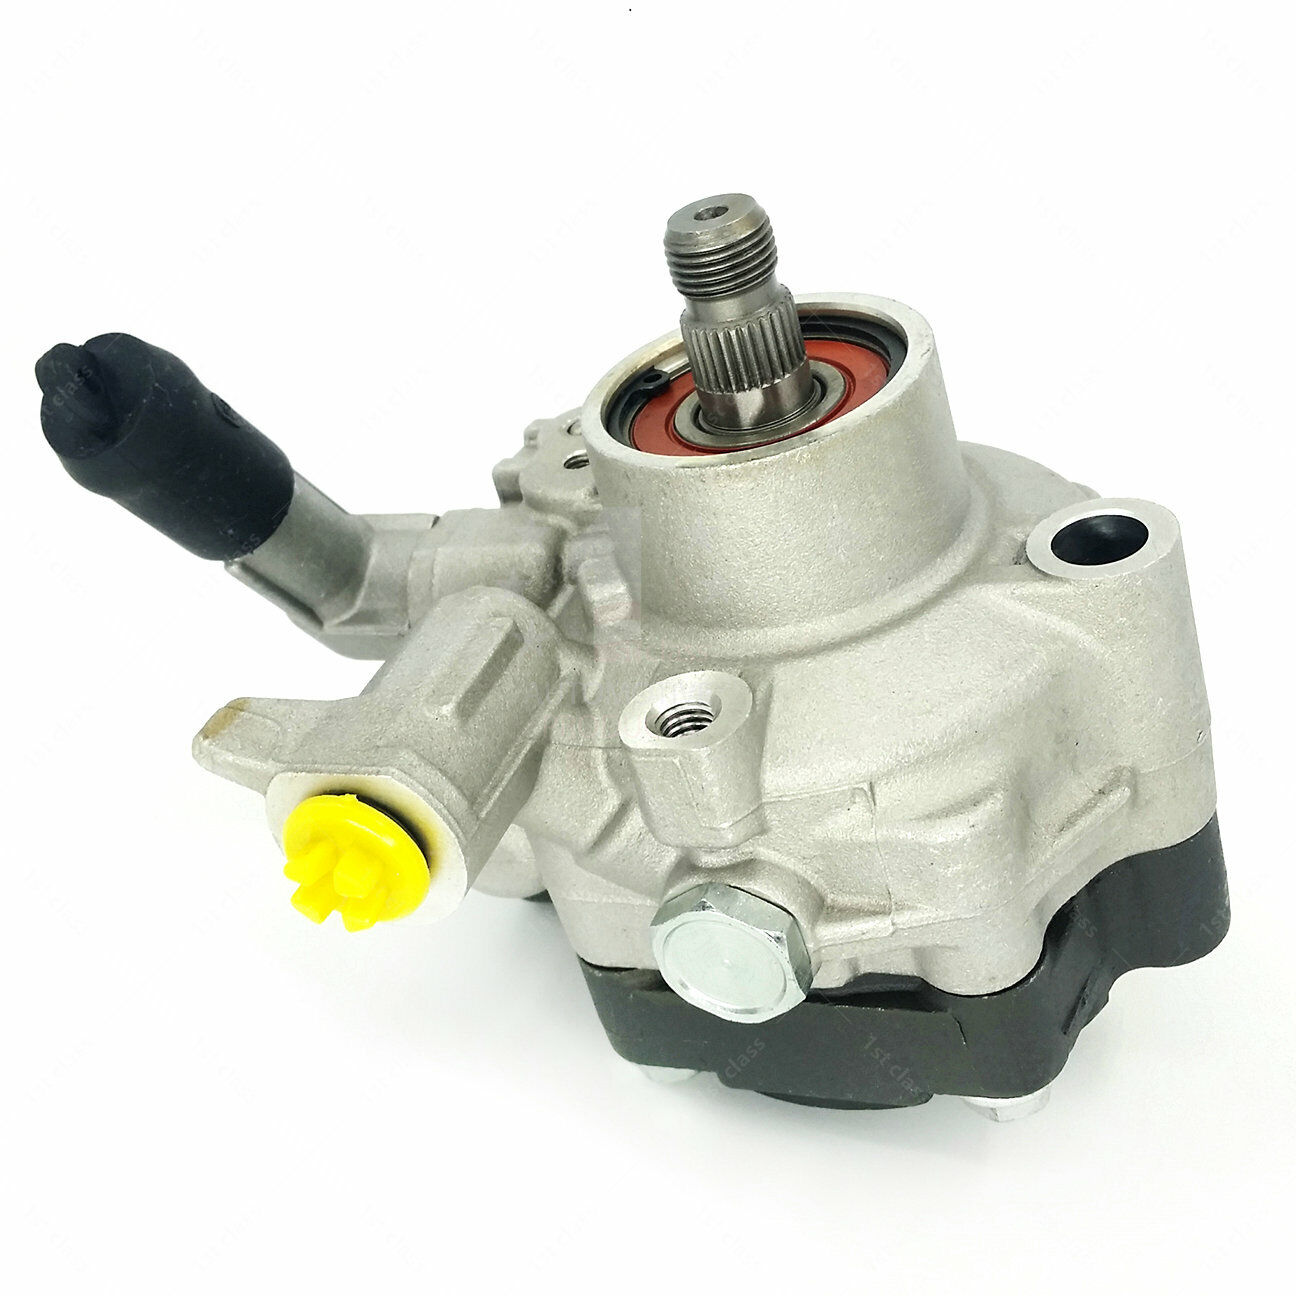 New Power Steering Pump For Subaru Legacy Impreza Forester Outback